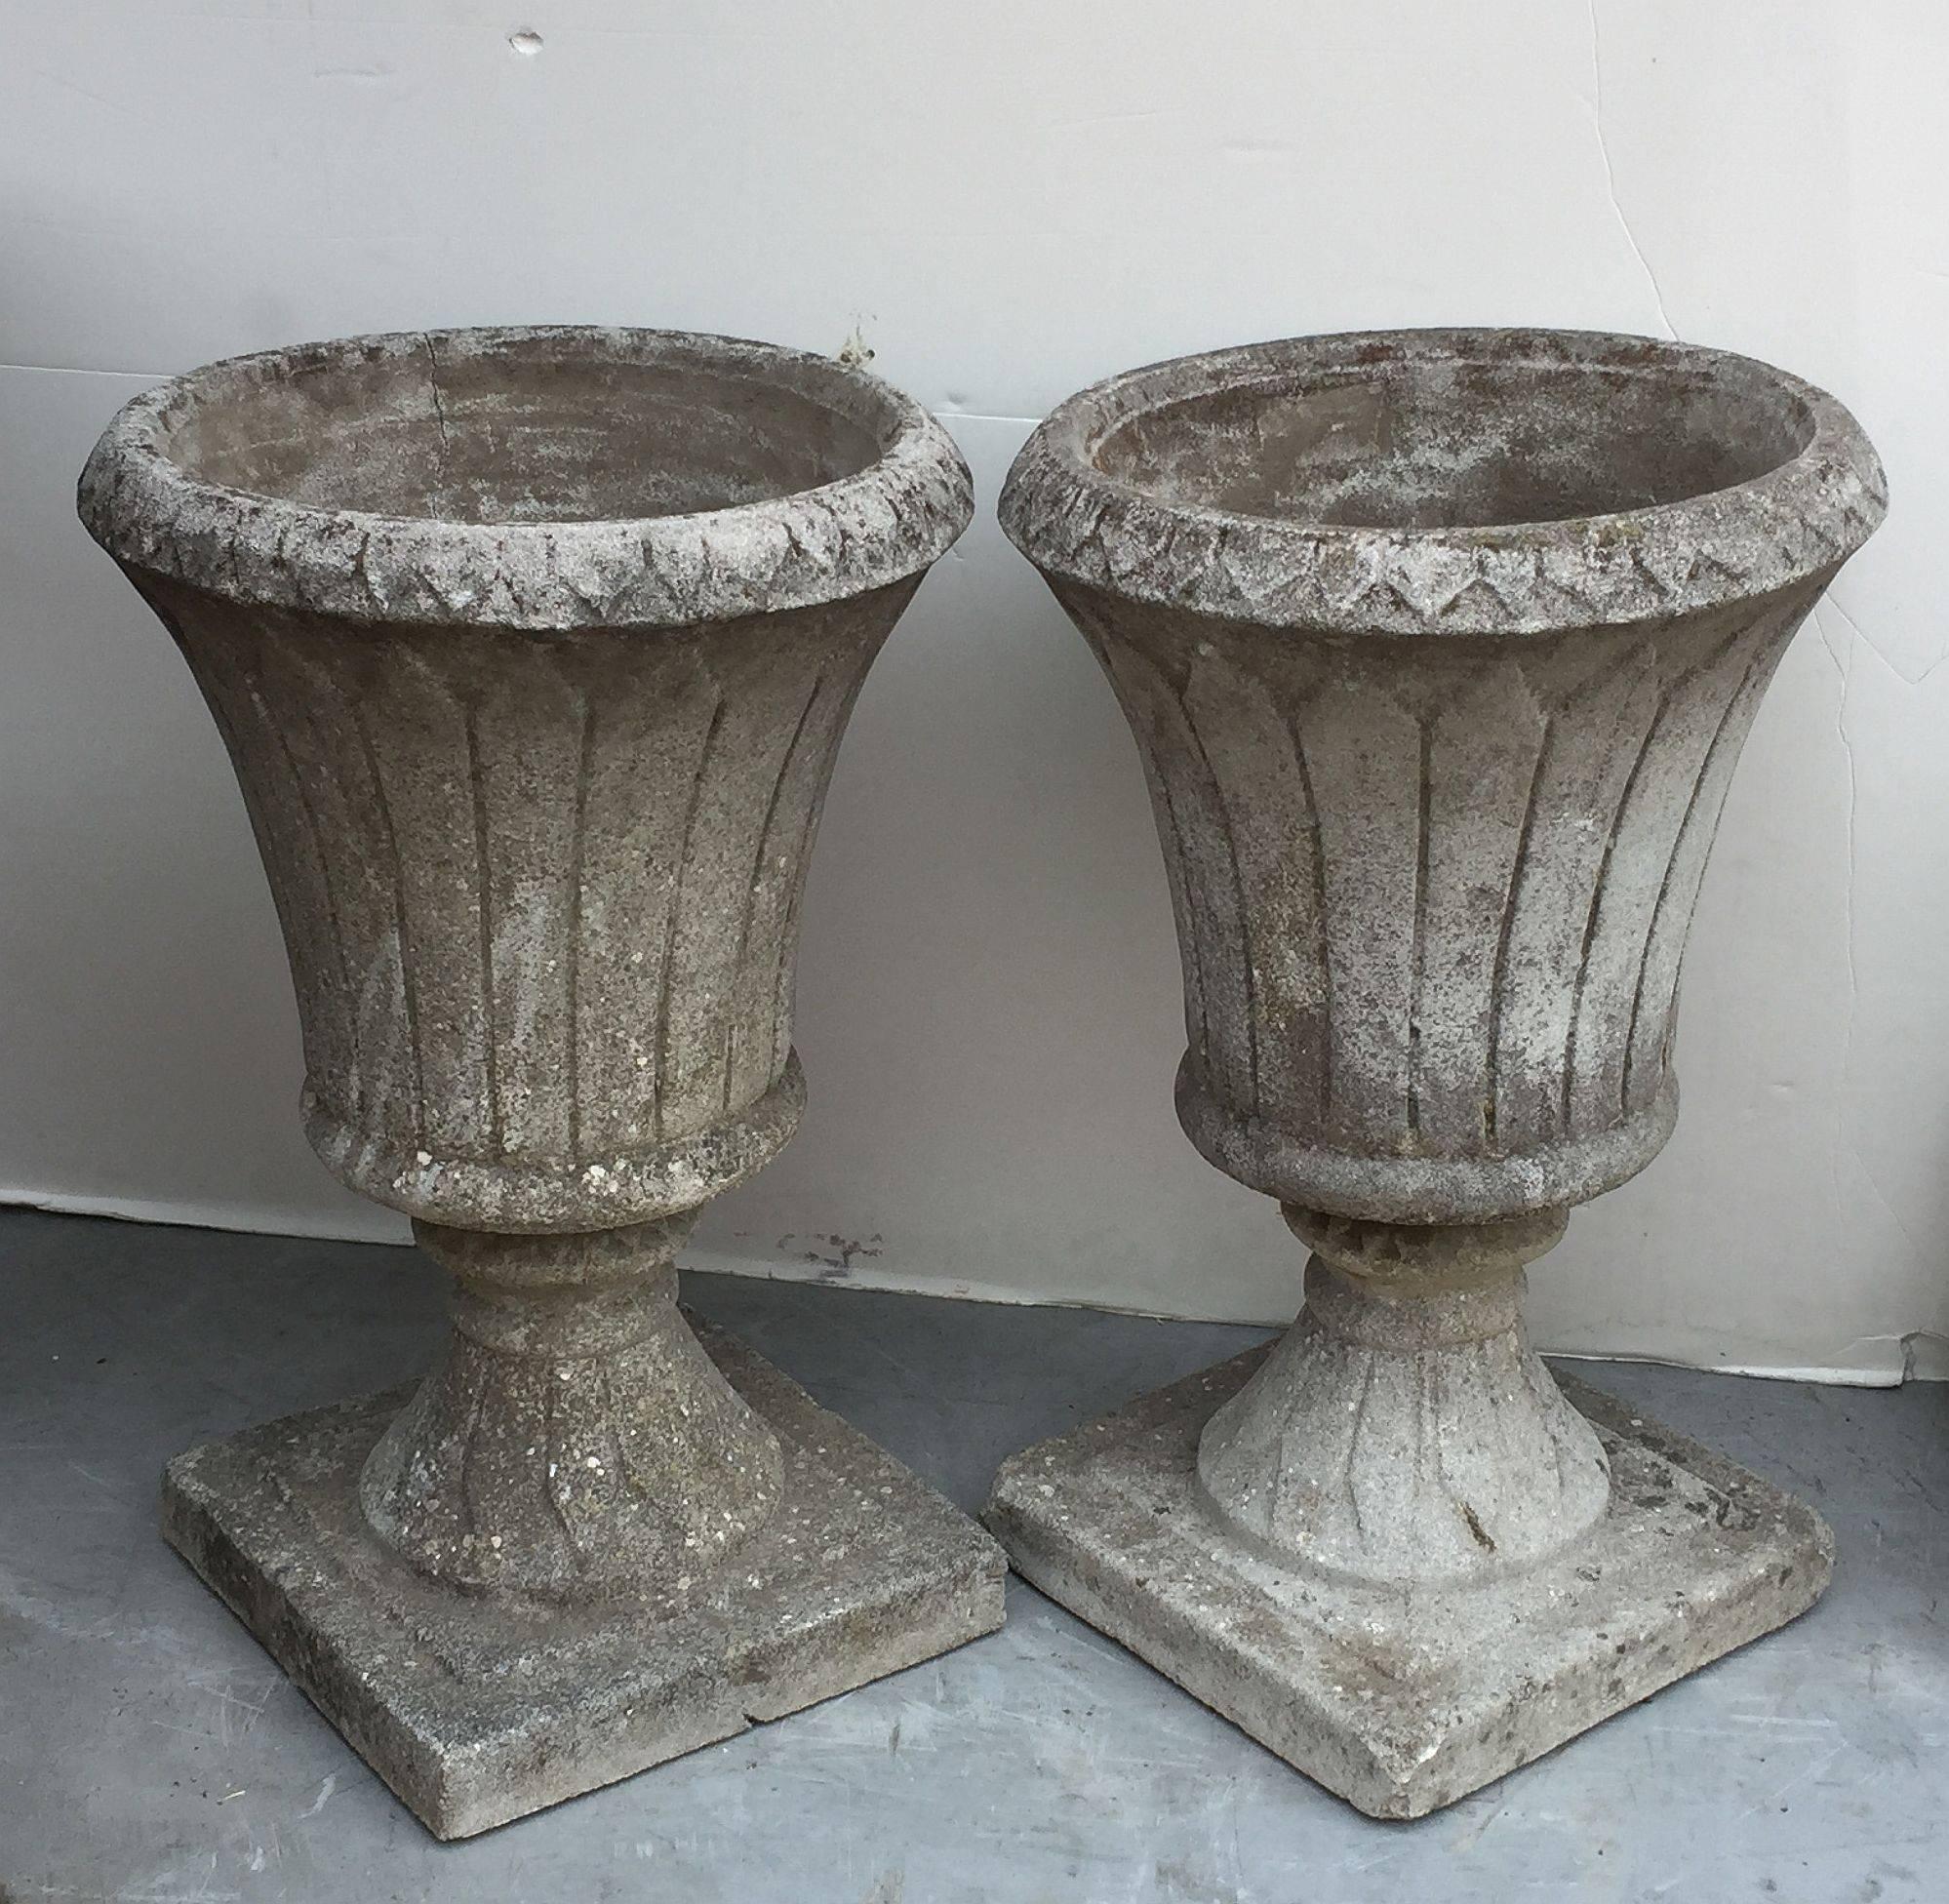 A fine pair of English garden urns or planters of composition stone in the classical style, each bowl featuring an stylized edge over a fluted column and raised square base.

Great for an indoor or outdoor garden room, garden, or